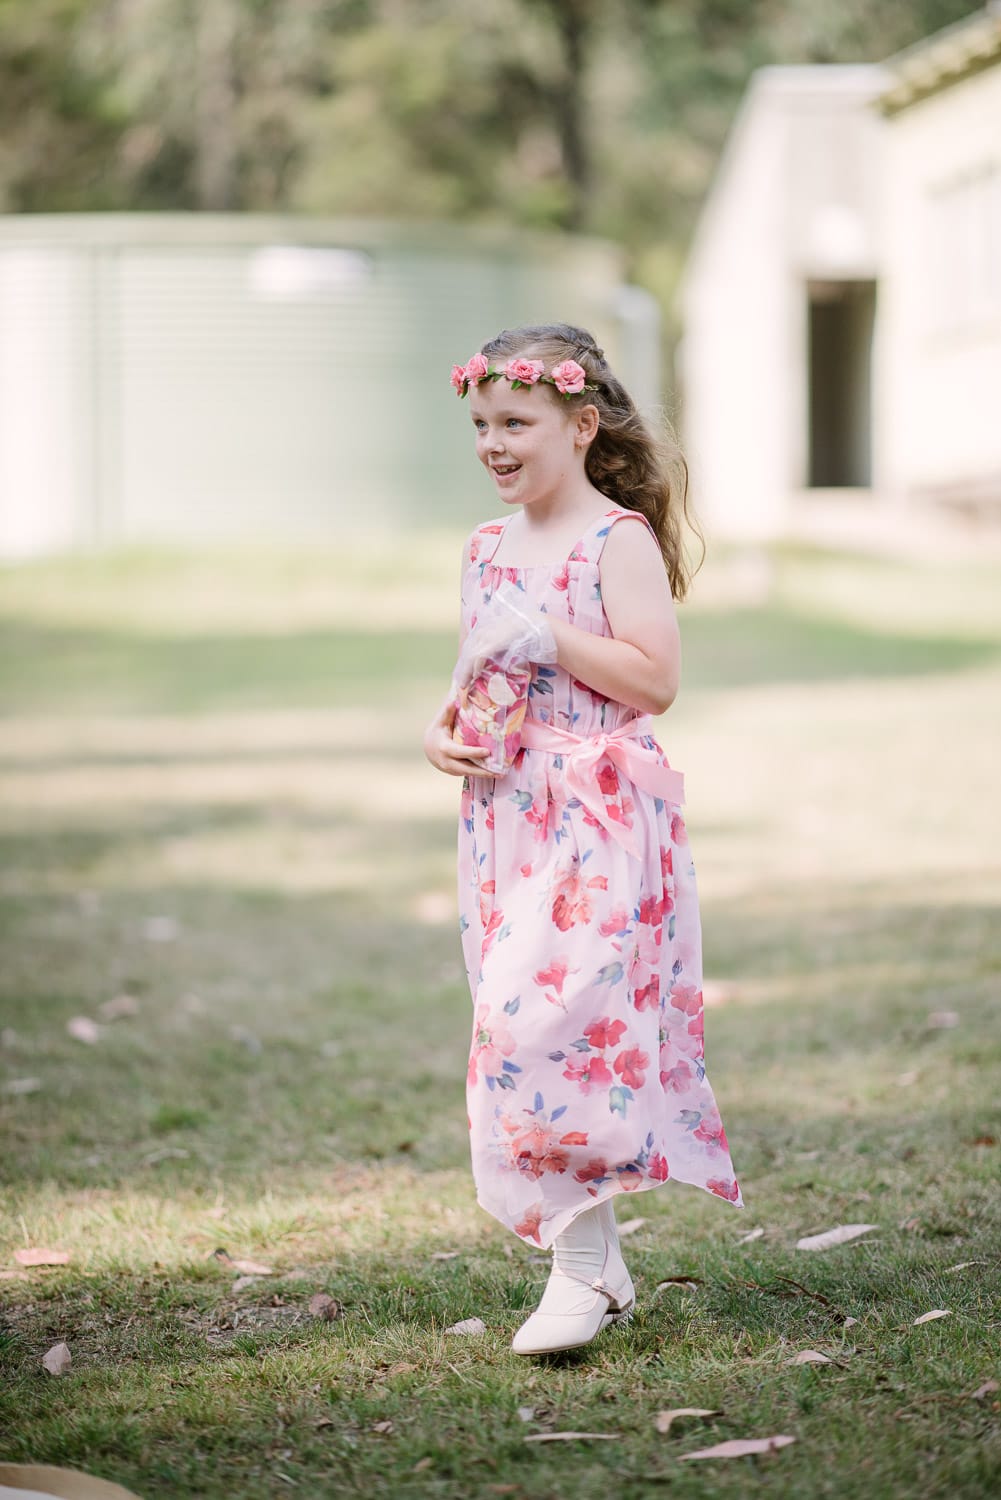 Flower girl at Scout Camp wedding